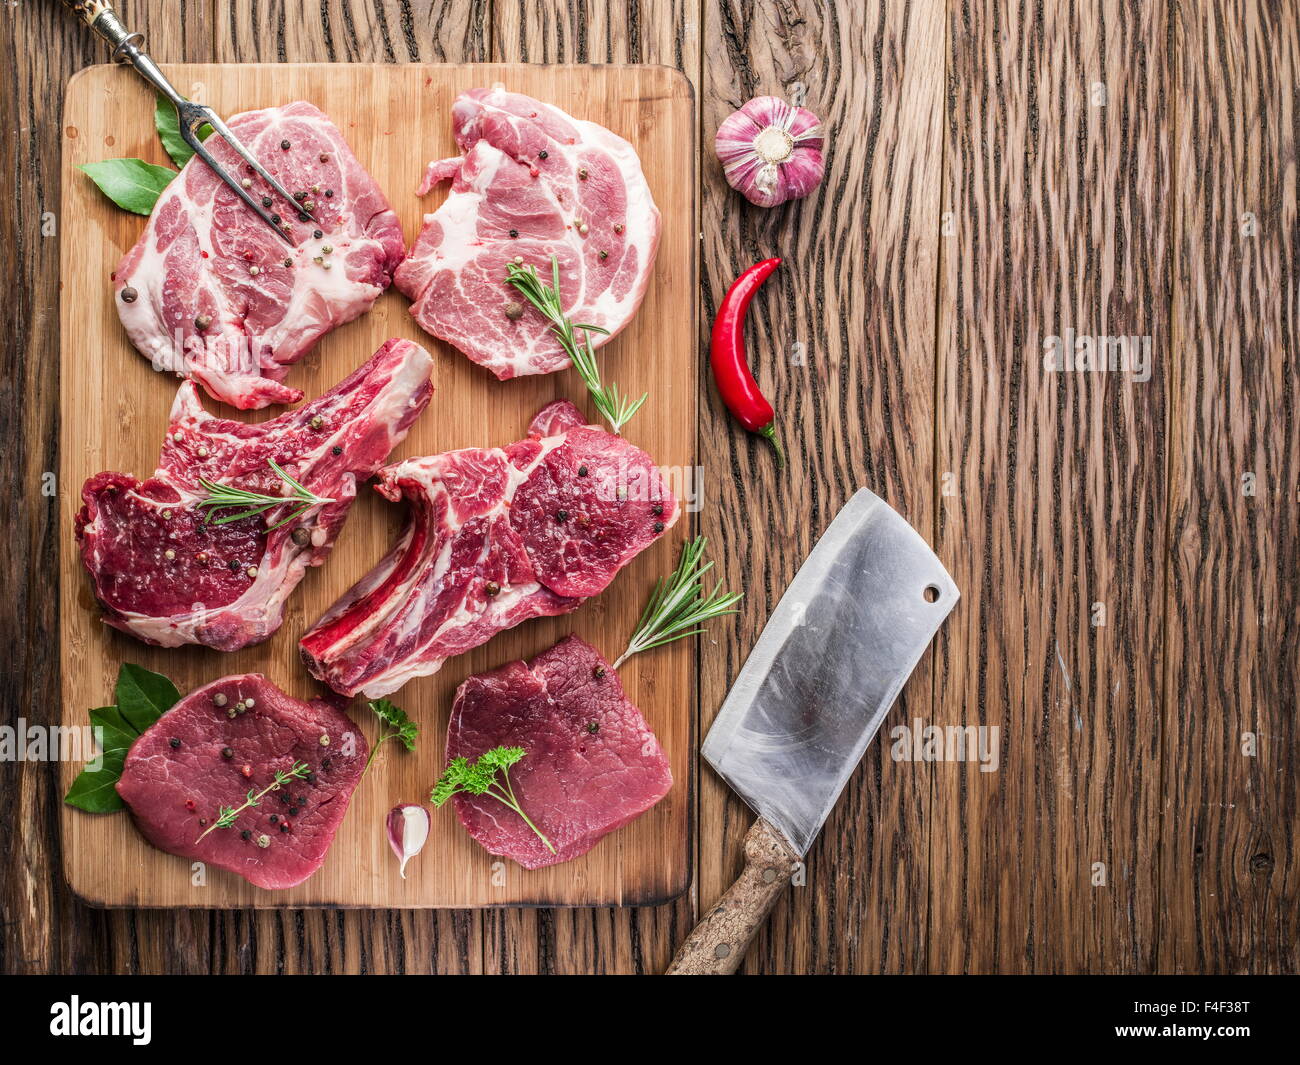 https://c8.alamy.com/comp/F4F38T/raw-meat-steaks-with-spices-on-the-wooden-cutting-board-F4F38T.jpg